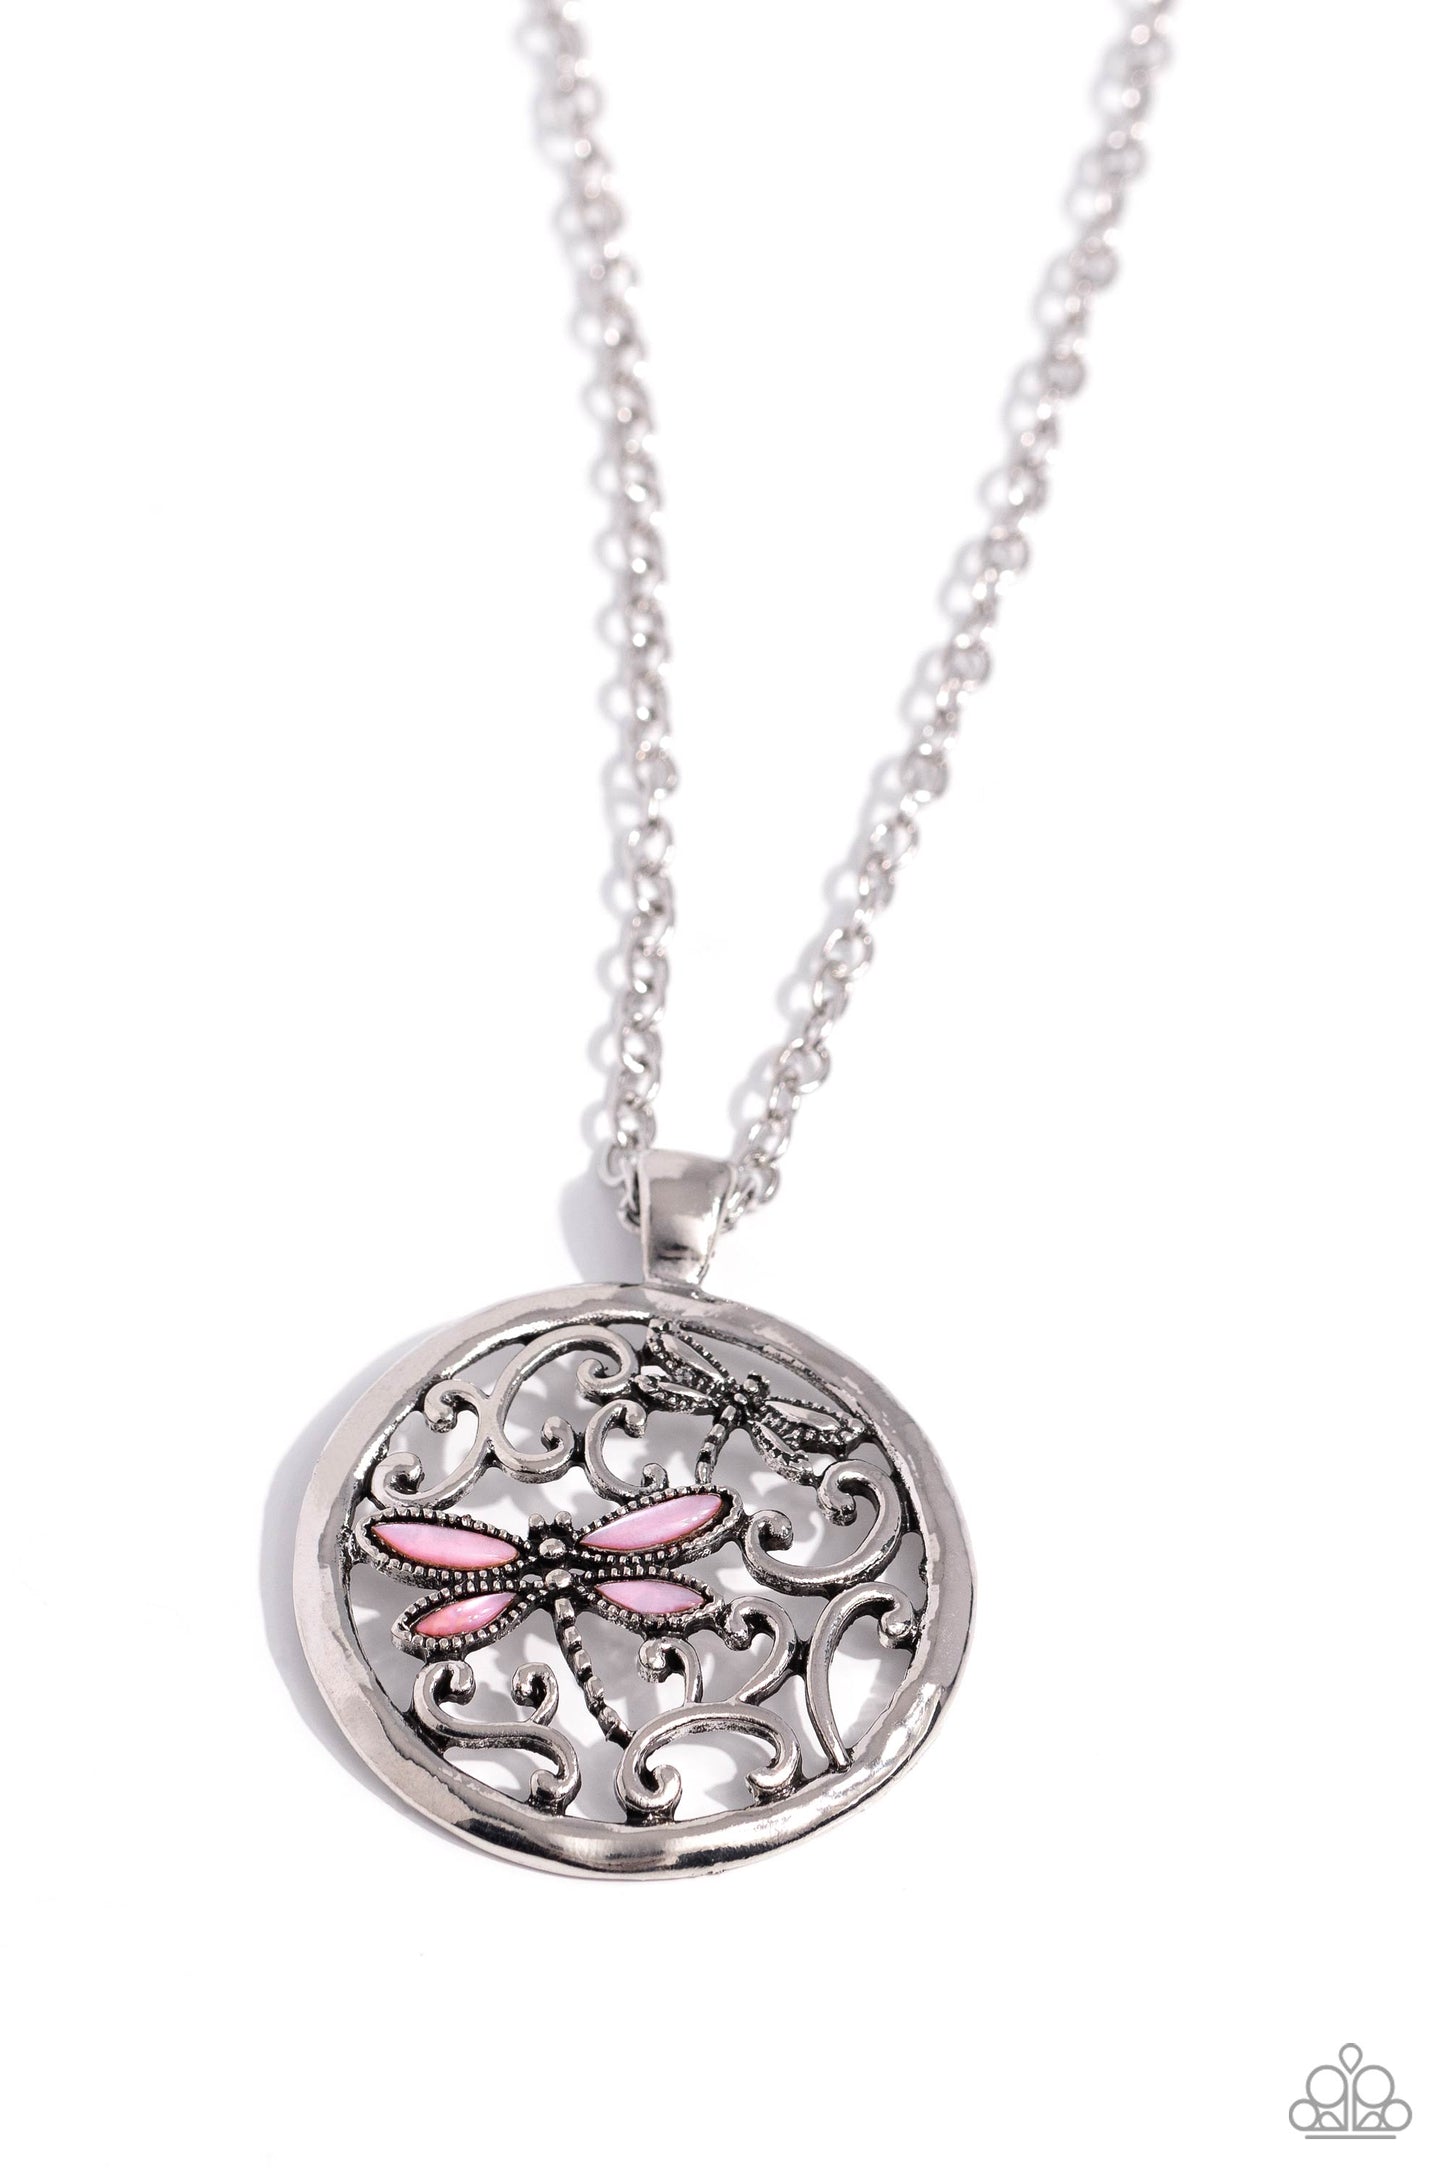 Dragonfly Daydream Pink Necklace - Paparazzi Accessories  Falling from an elongated silver chain, an airy circular pendant with frilly filigree and studded silver dragonflies lined with pink cat's eye wings creates a whimsically rustic finish. Features an adjustable clasp closure.  Sold as one individual necklace. Includes one pair of matching earrings.  Sku:  P2WH-PKXX-475XX